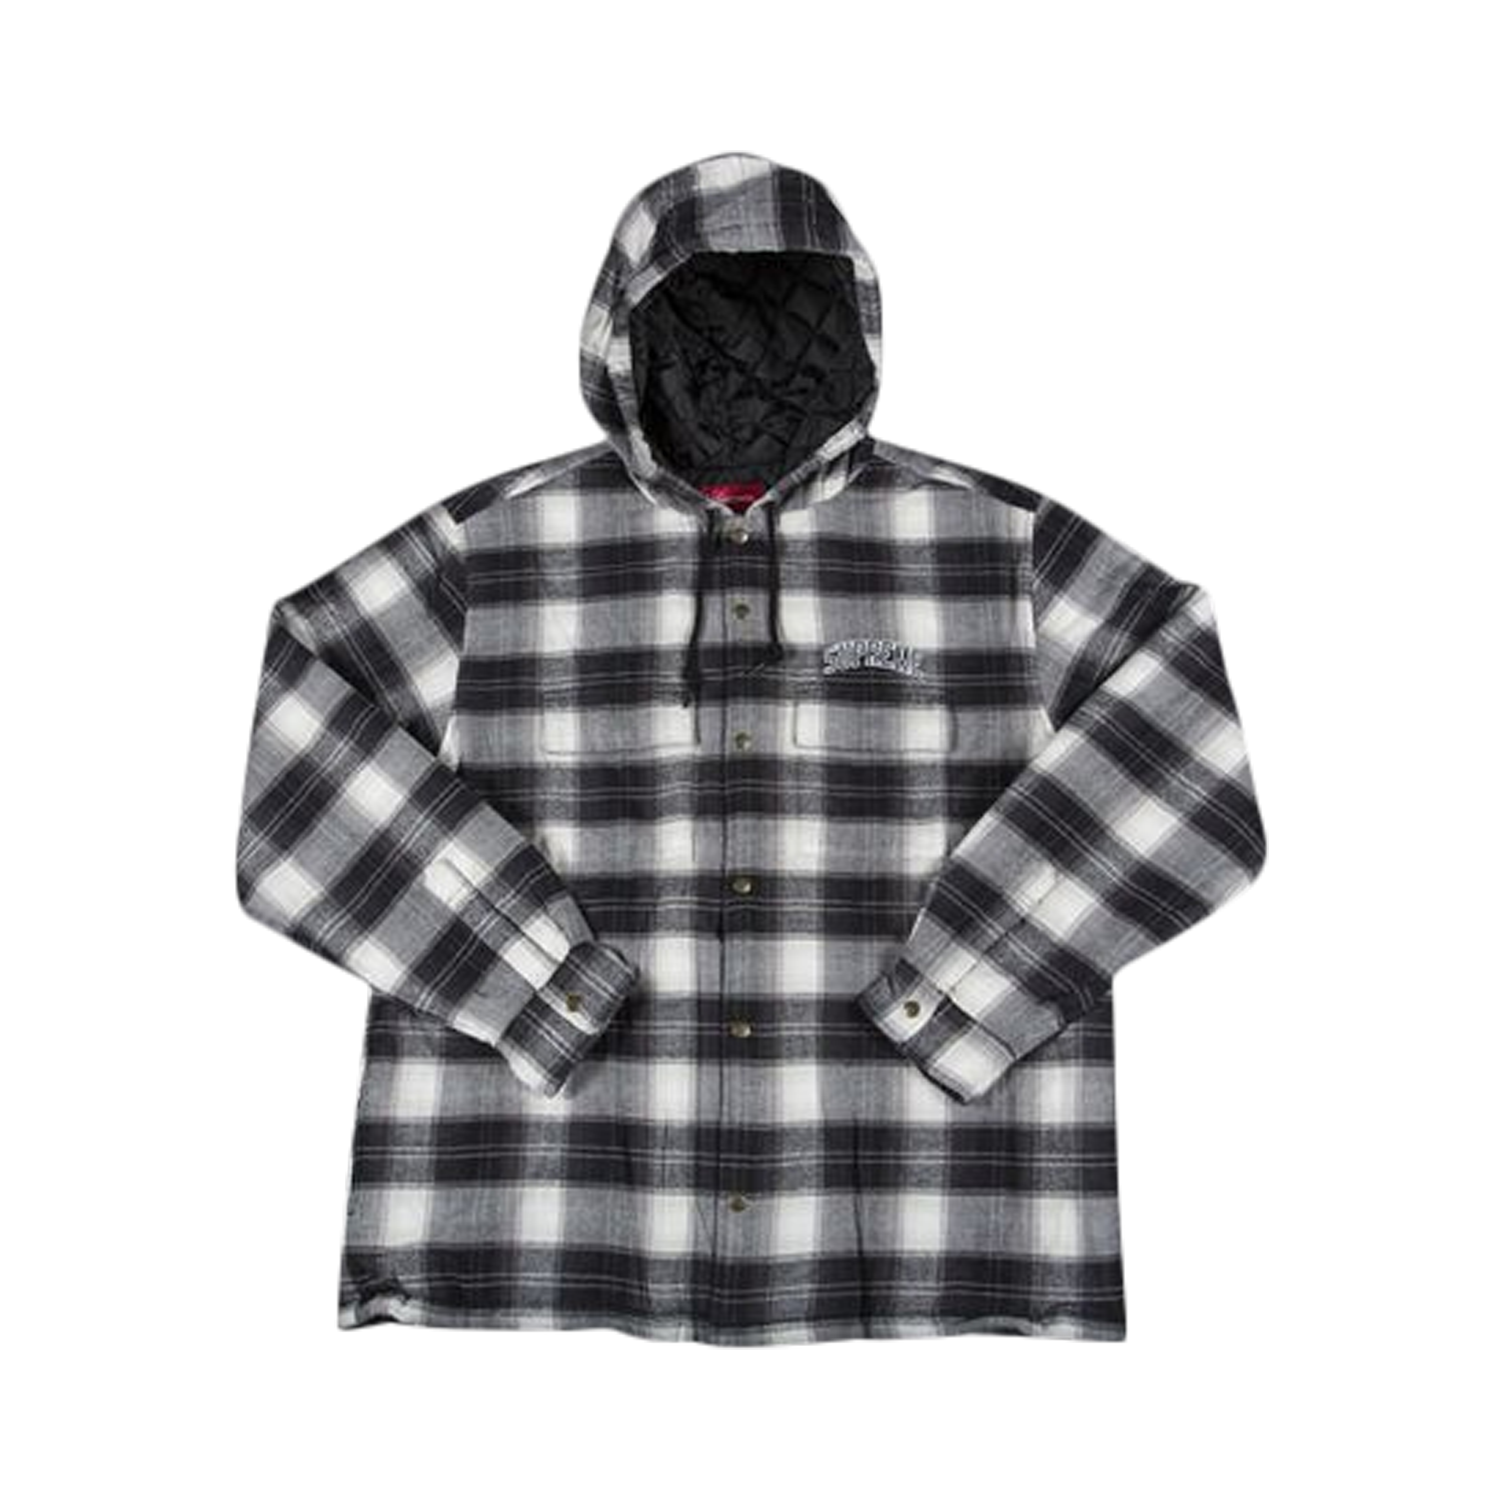 Buy Supreme Quilted Hooded Plaid Shirt 'Black' - FW19S27 BLACK | GOAT